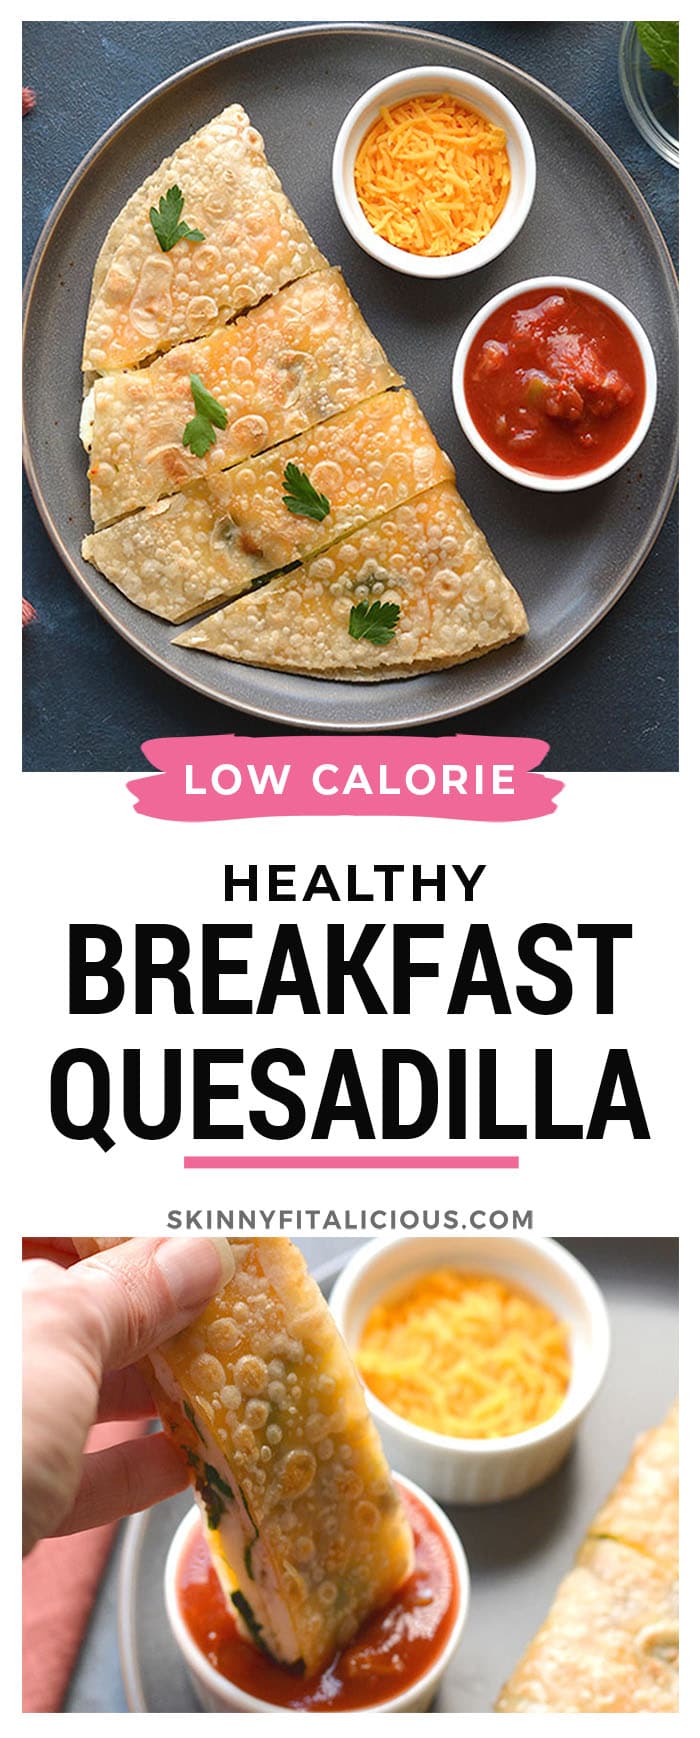 Healthy Breakfast Quesadilla made with egg whites, cheese, mushrooms and spinach. An easy breakfast that's filling, delicious and low calorie! Gluten Free + Low Calorie